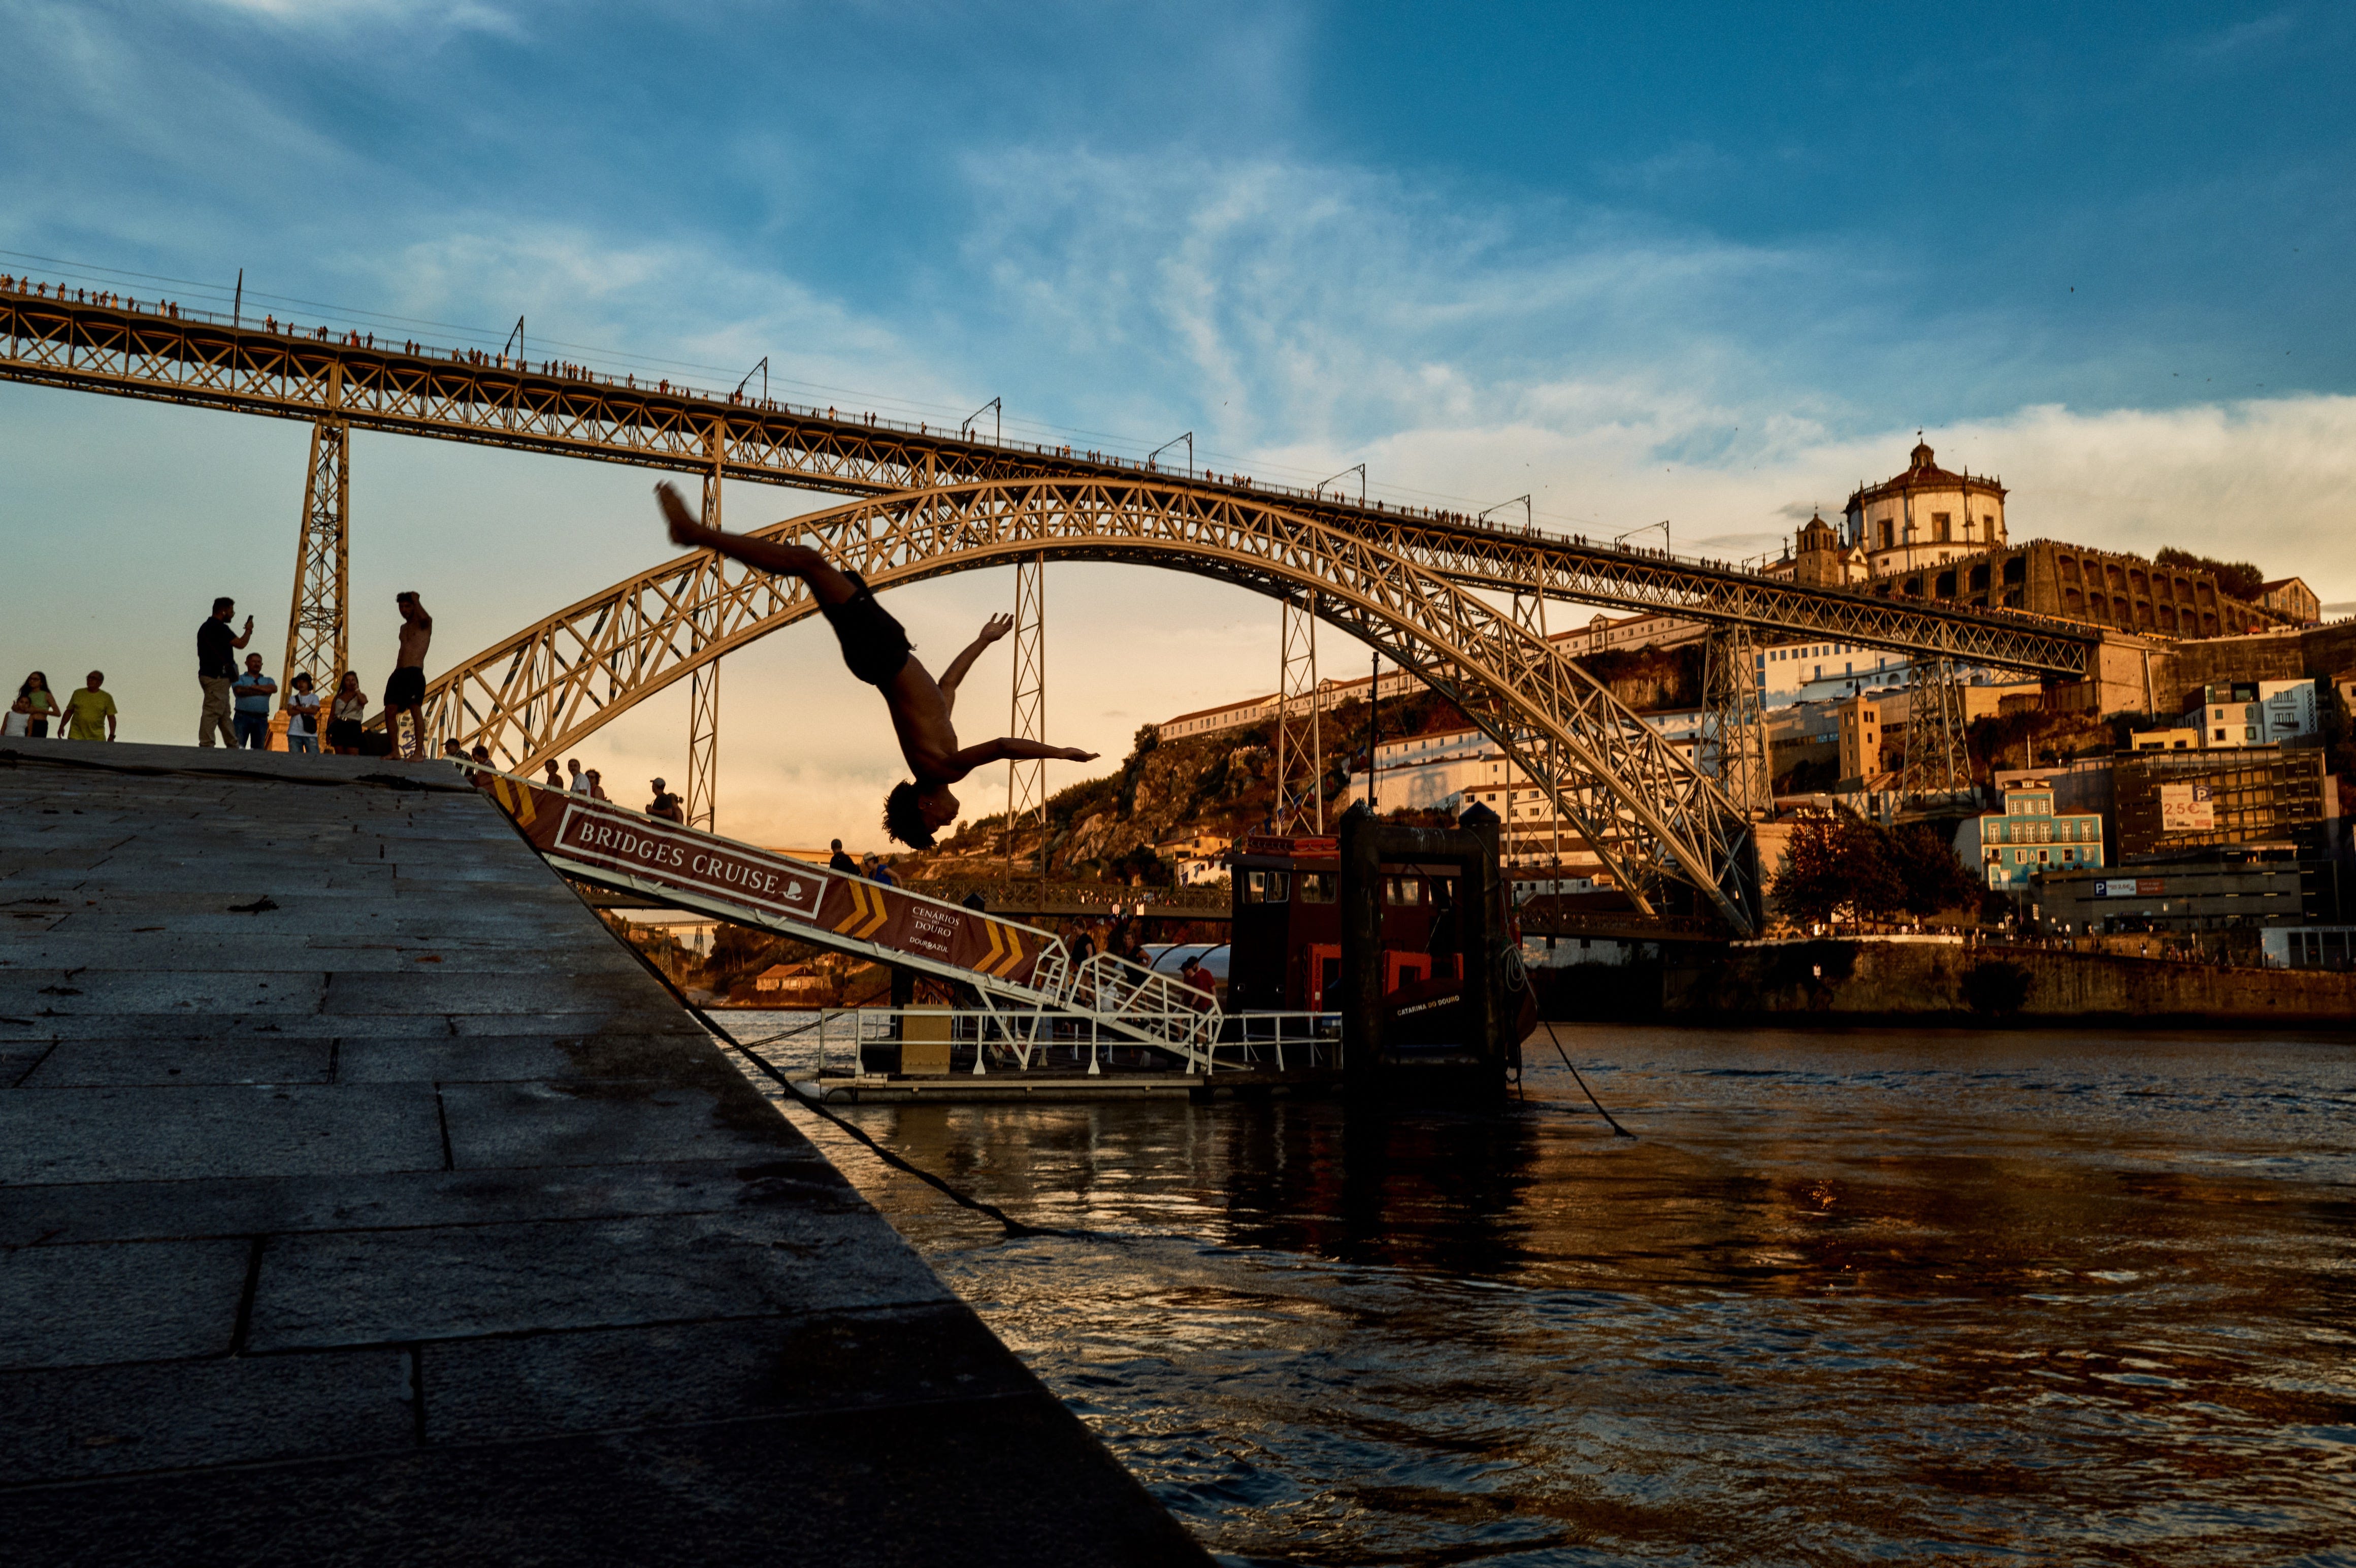 48 hours in Porto with Leica - by Gajan Balan